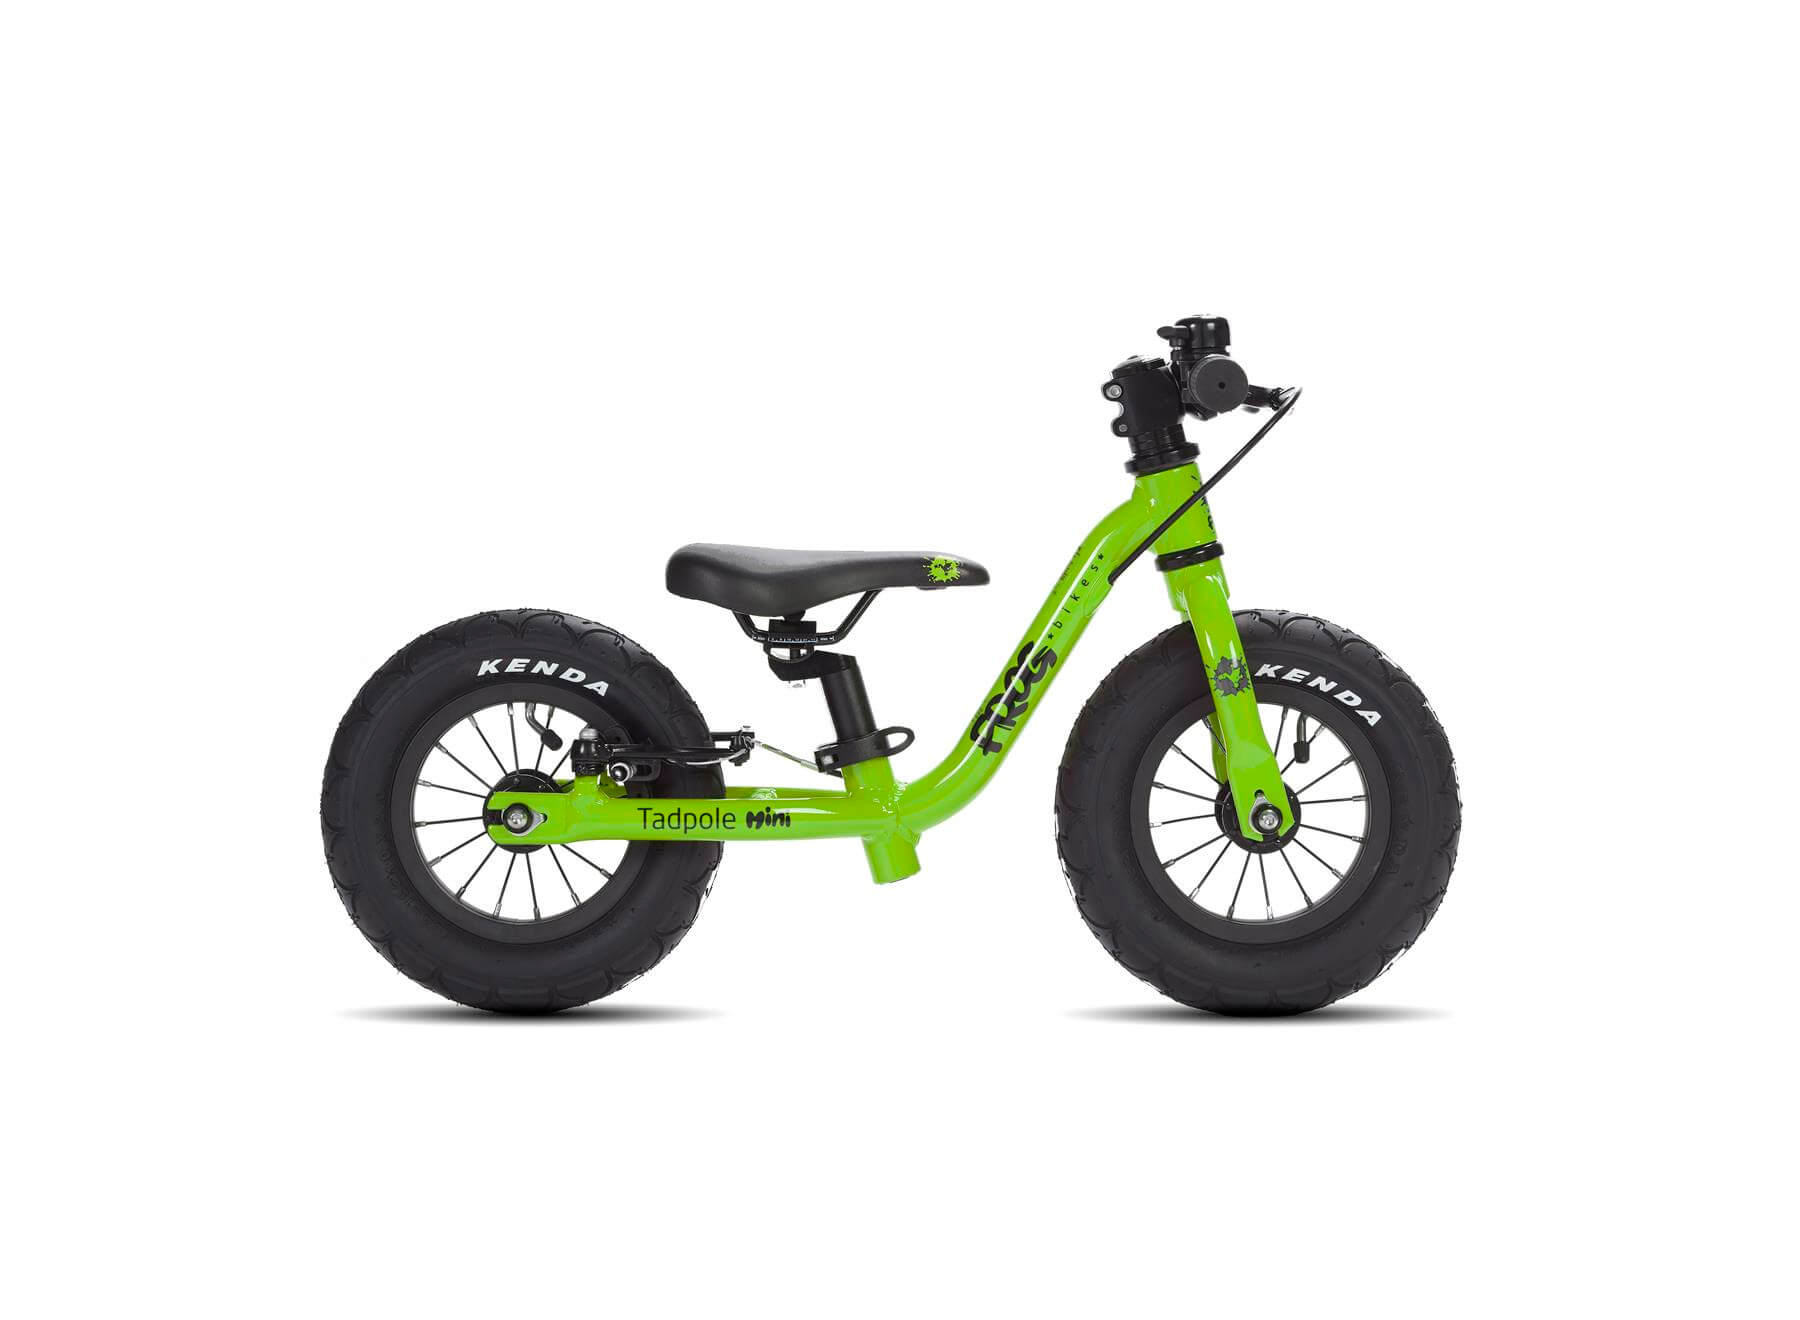 frog bike for 3 year old